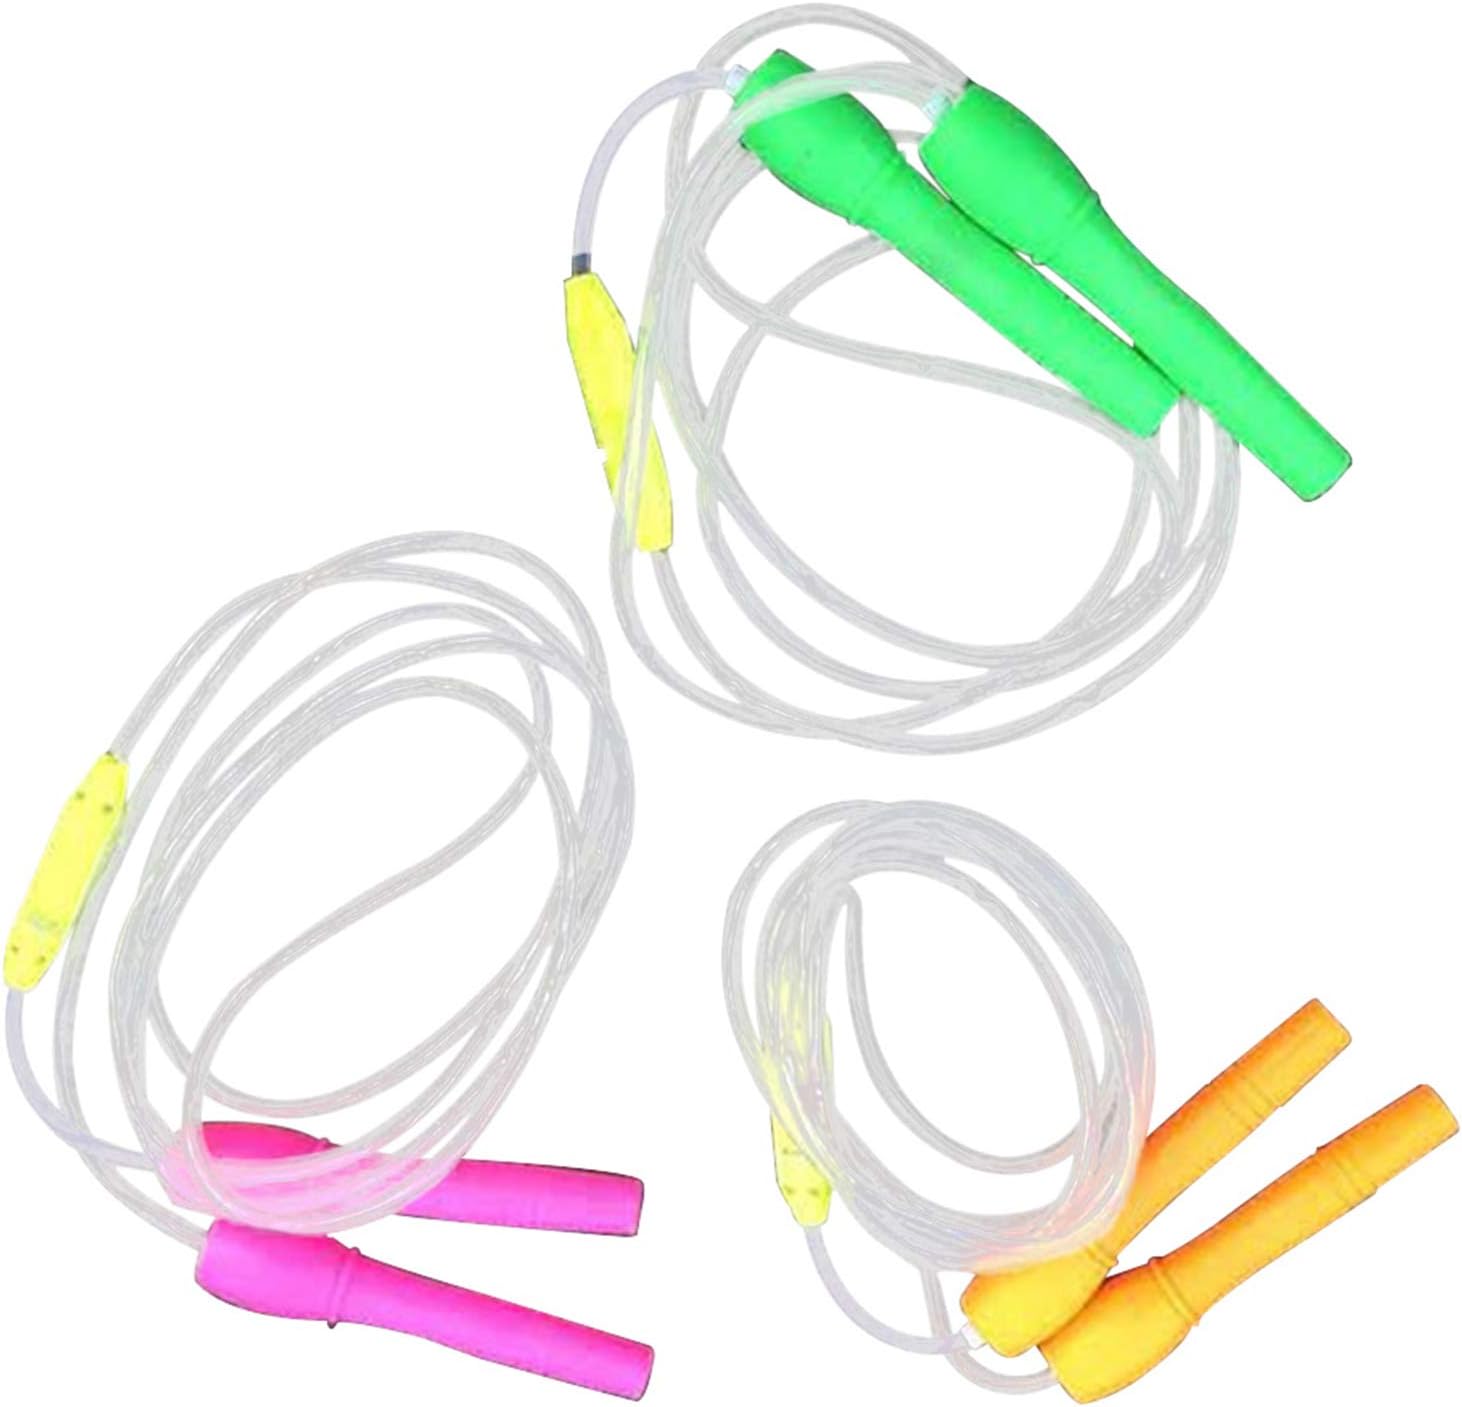 Colorful LED Light Jump Rope - Home Essentials Store Retail